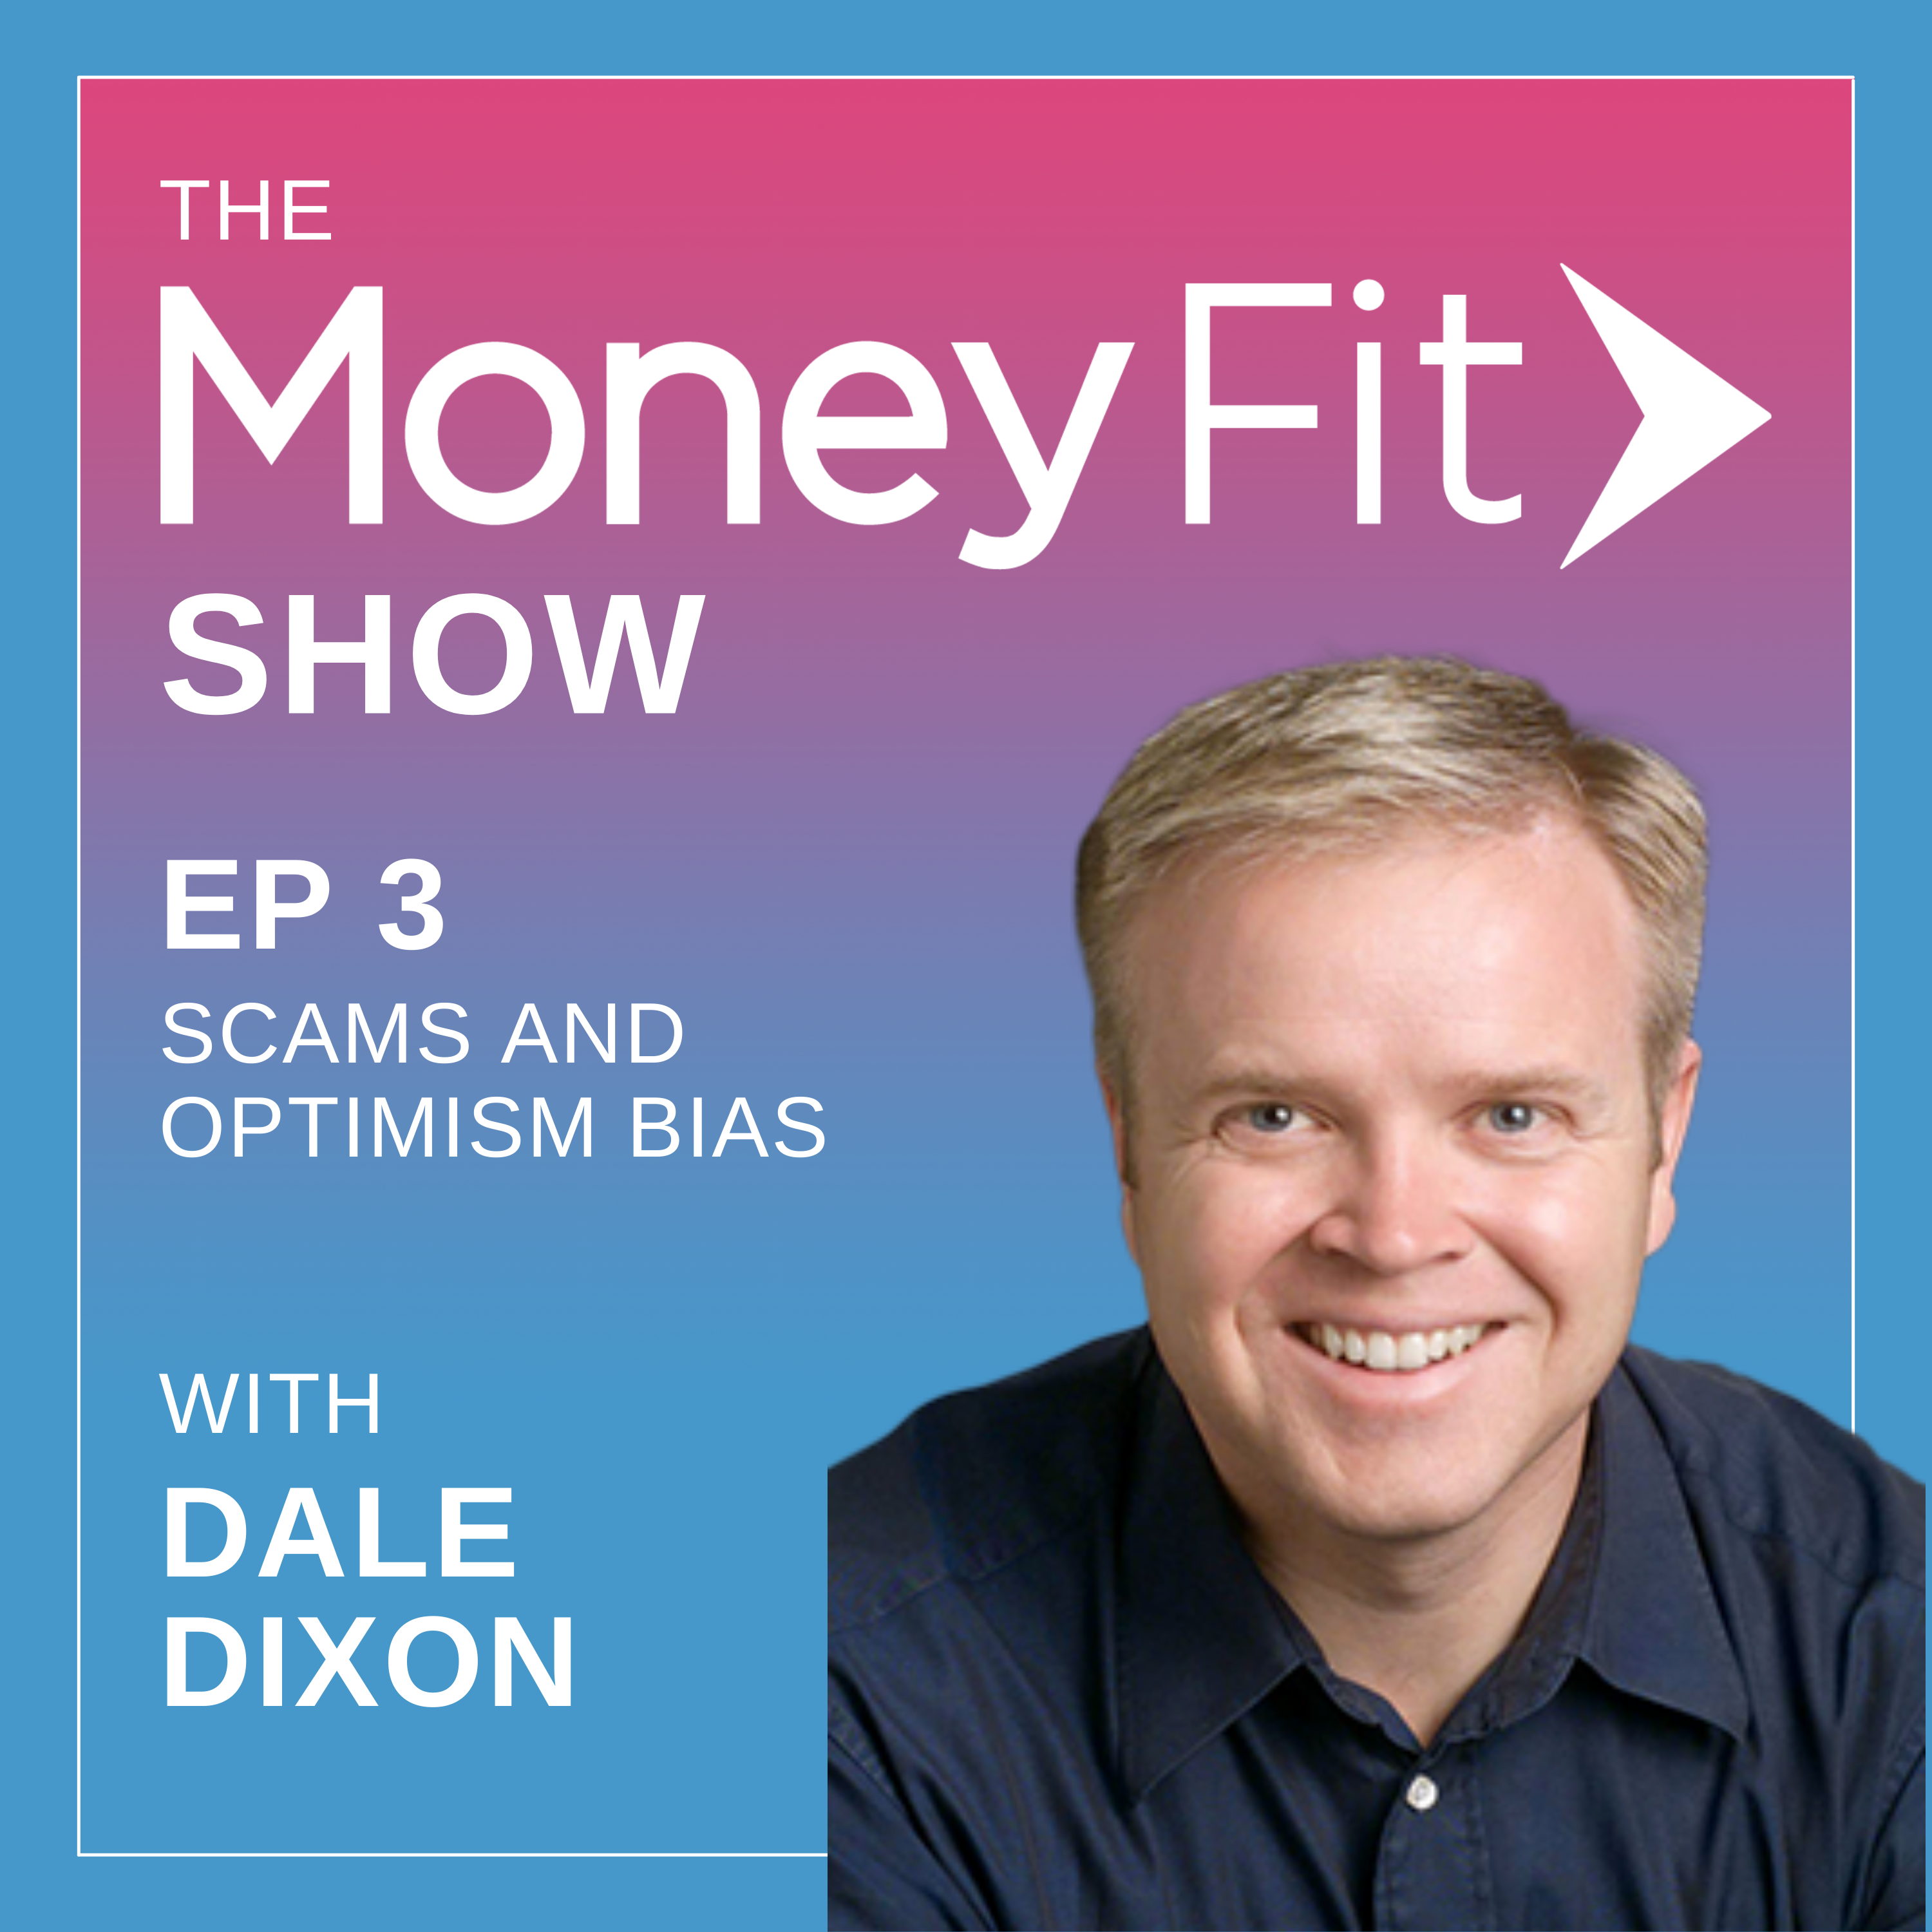 Scams and the Optimism Bias with Dale Dixon